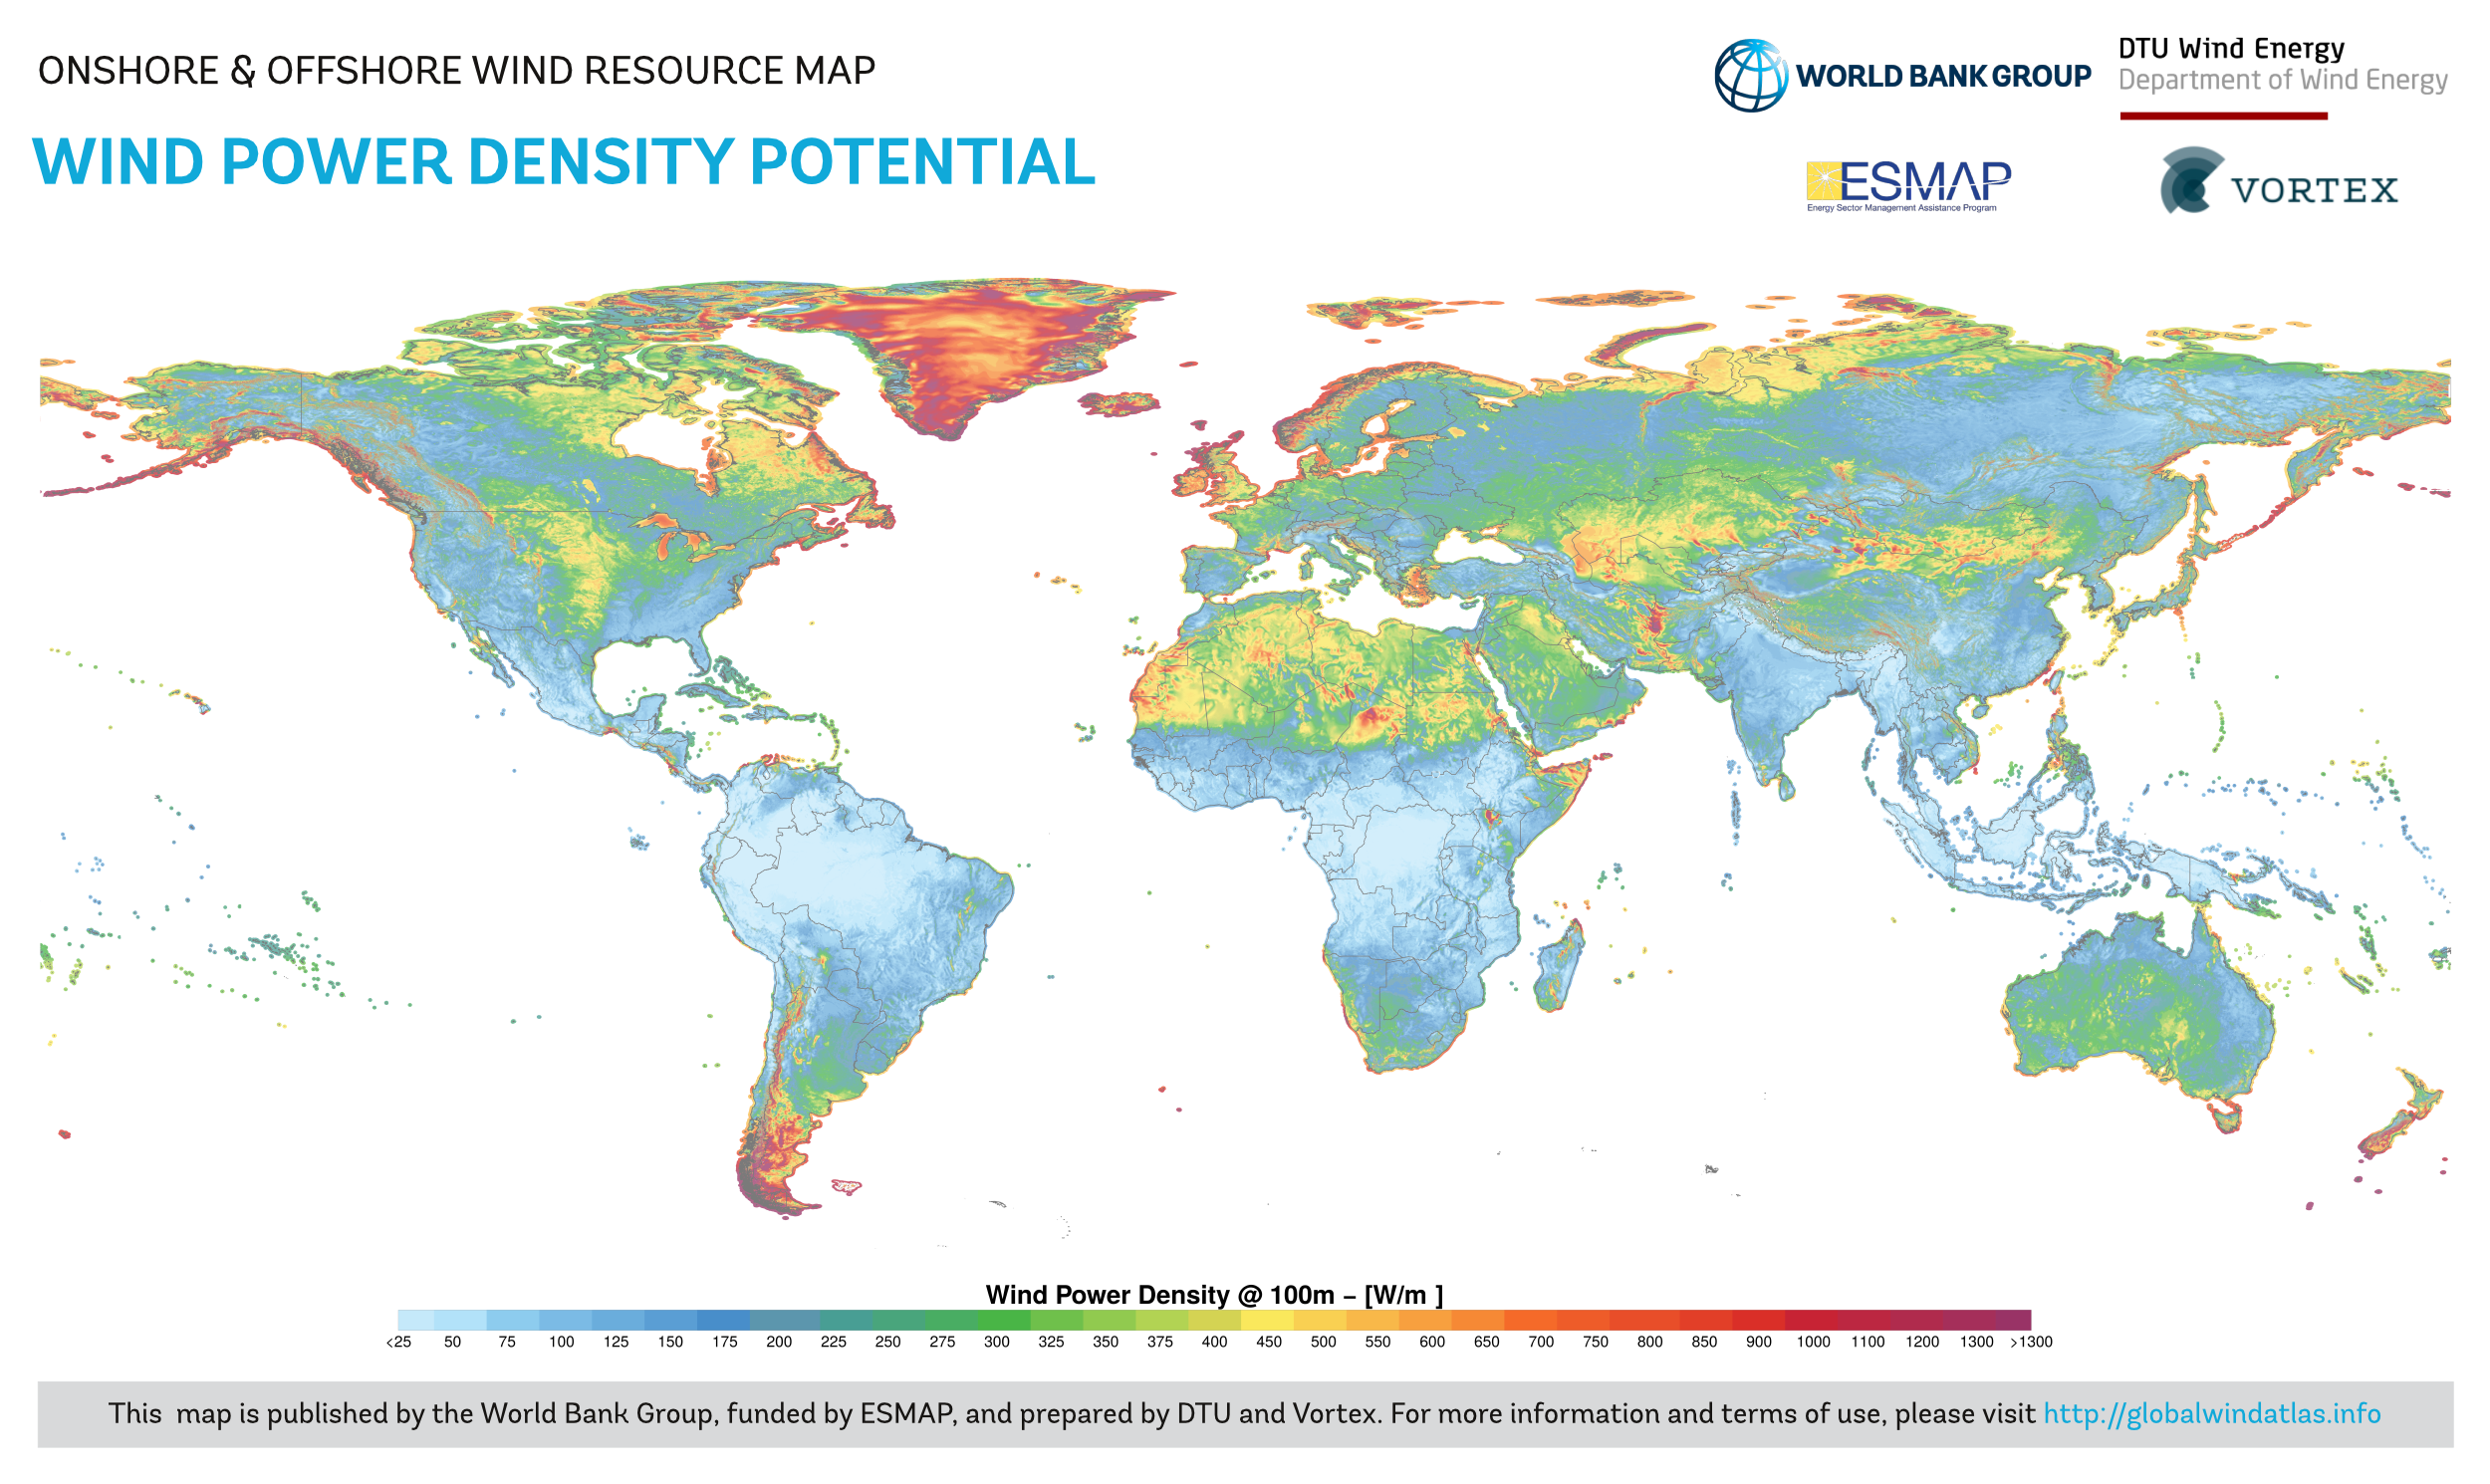 Global_Map_of_Wind_Power_Density_Potential.png